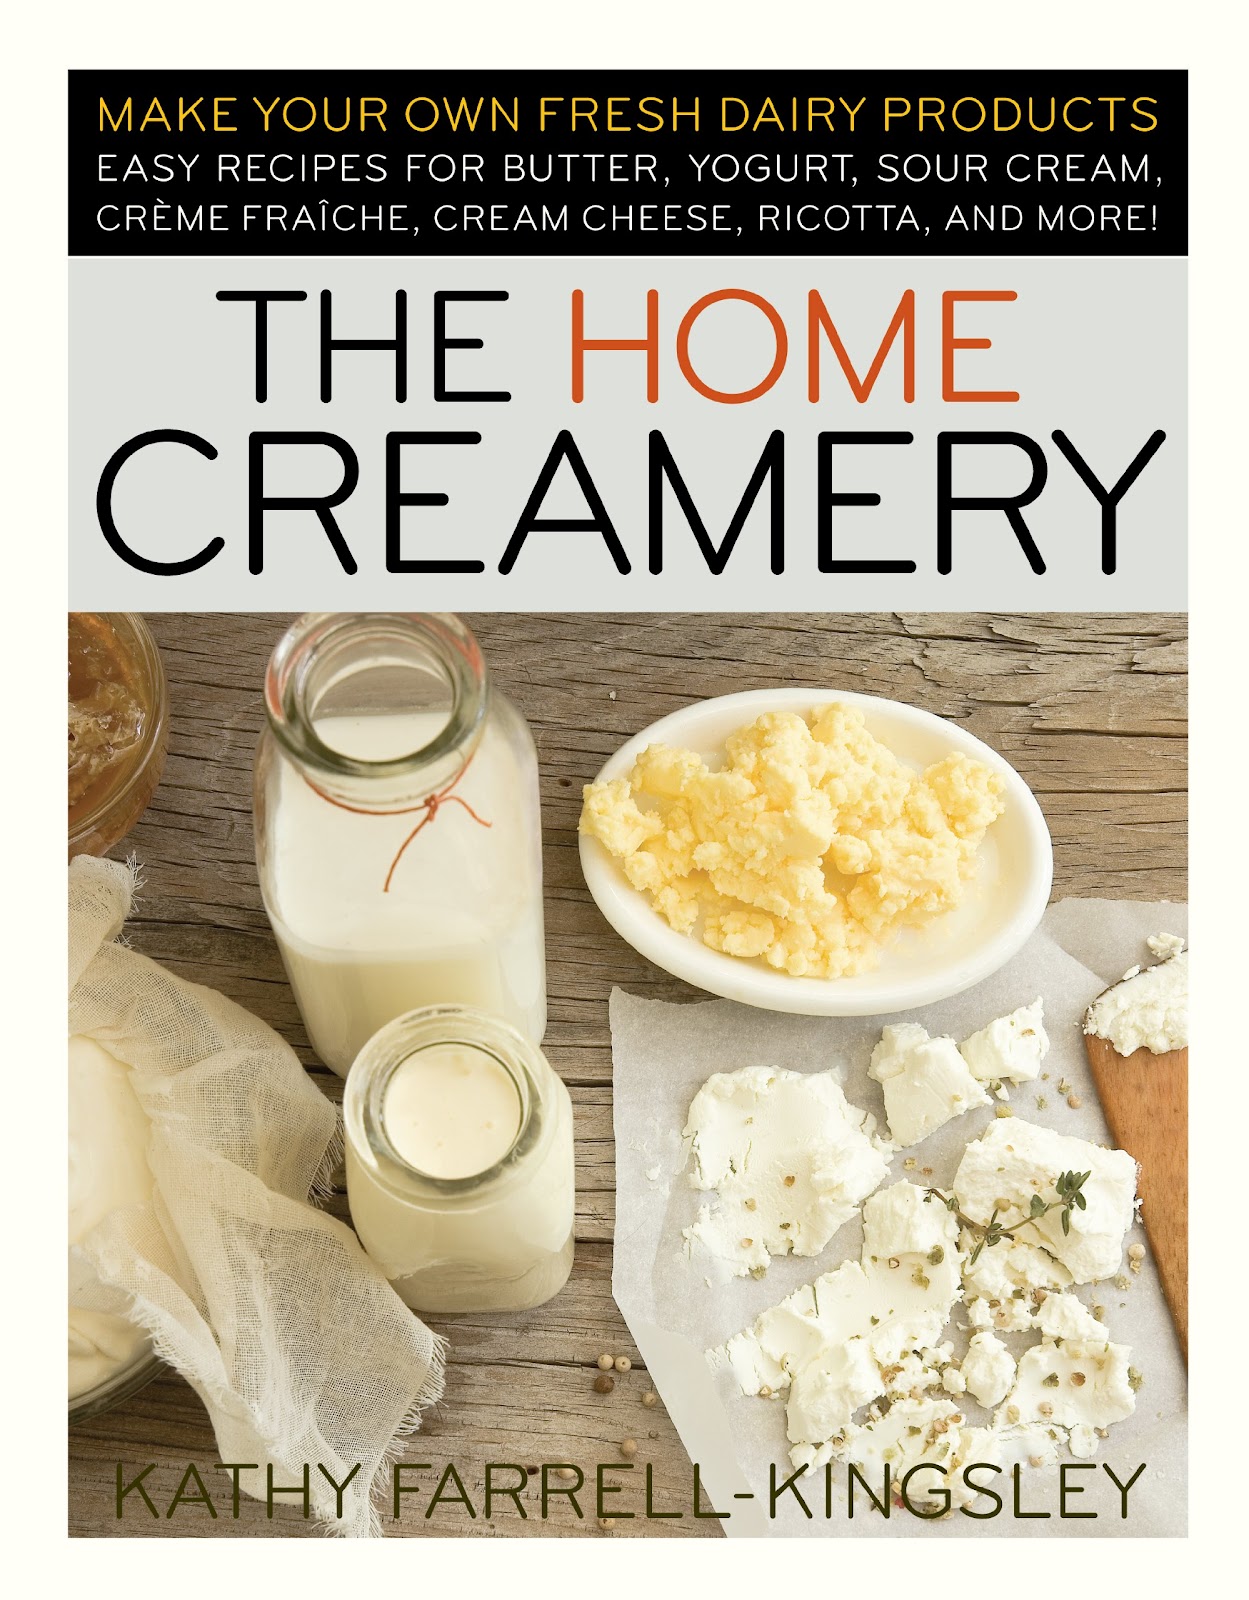 PDF Books - The Home Creamery: Make Your Own Fresh Dairy Products; Easy Recipes for Butter, Yogurt, Sour Cream, Creme Fraiche, Cream Cheese, Ricotta, and More!